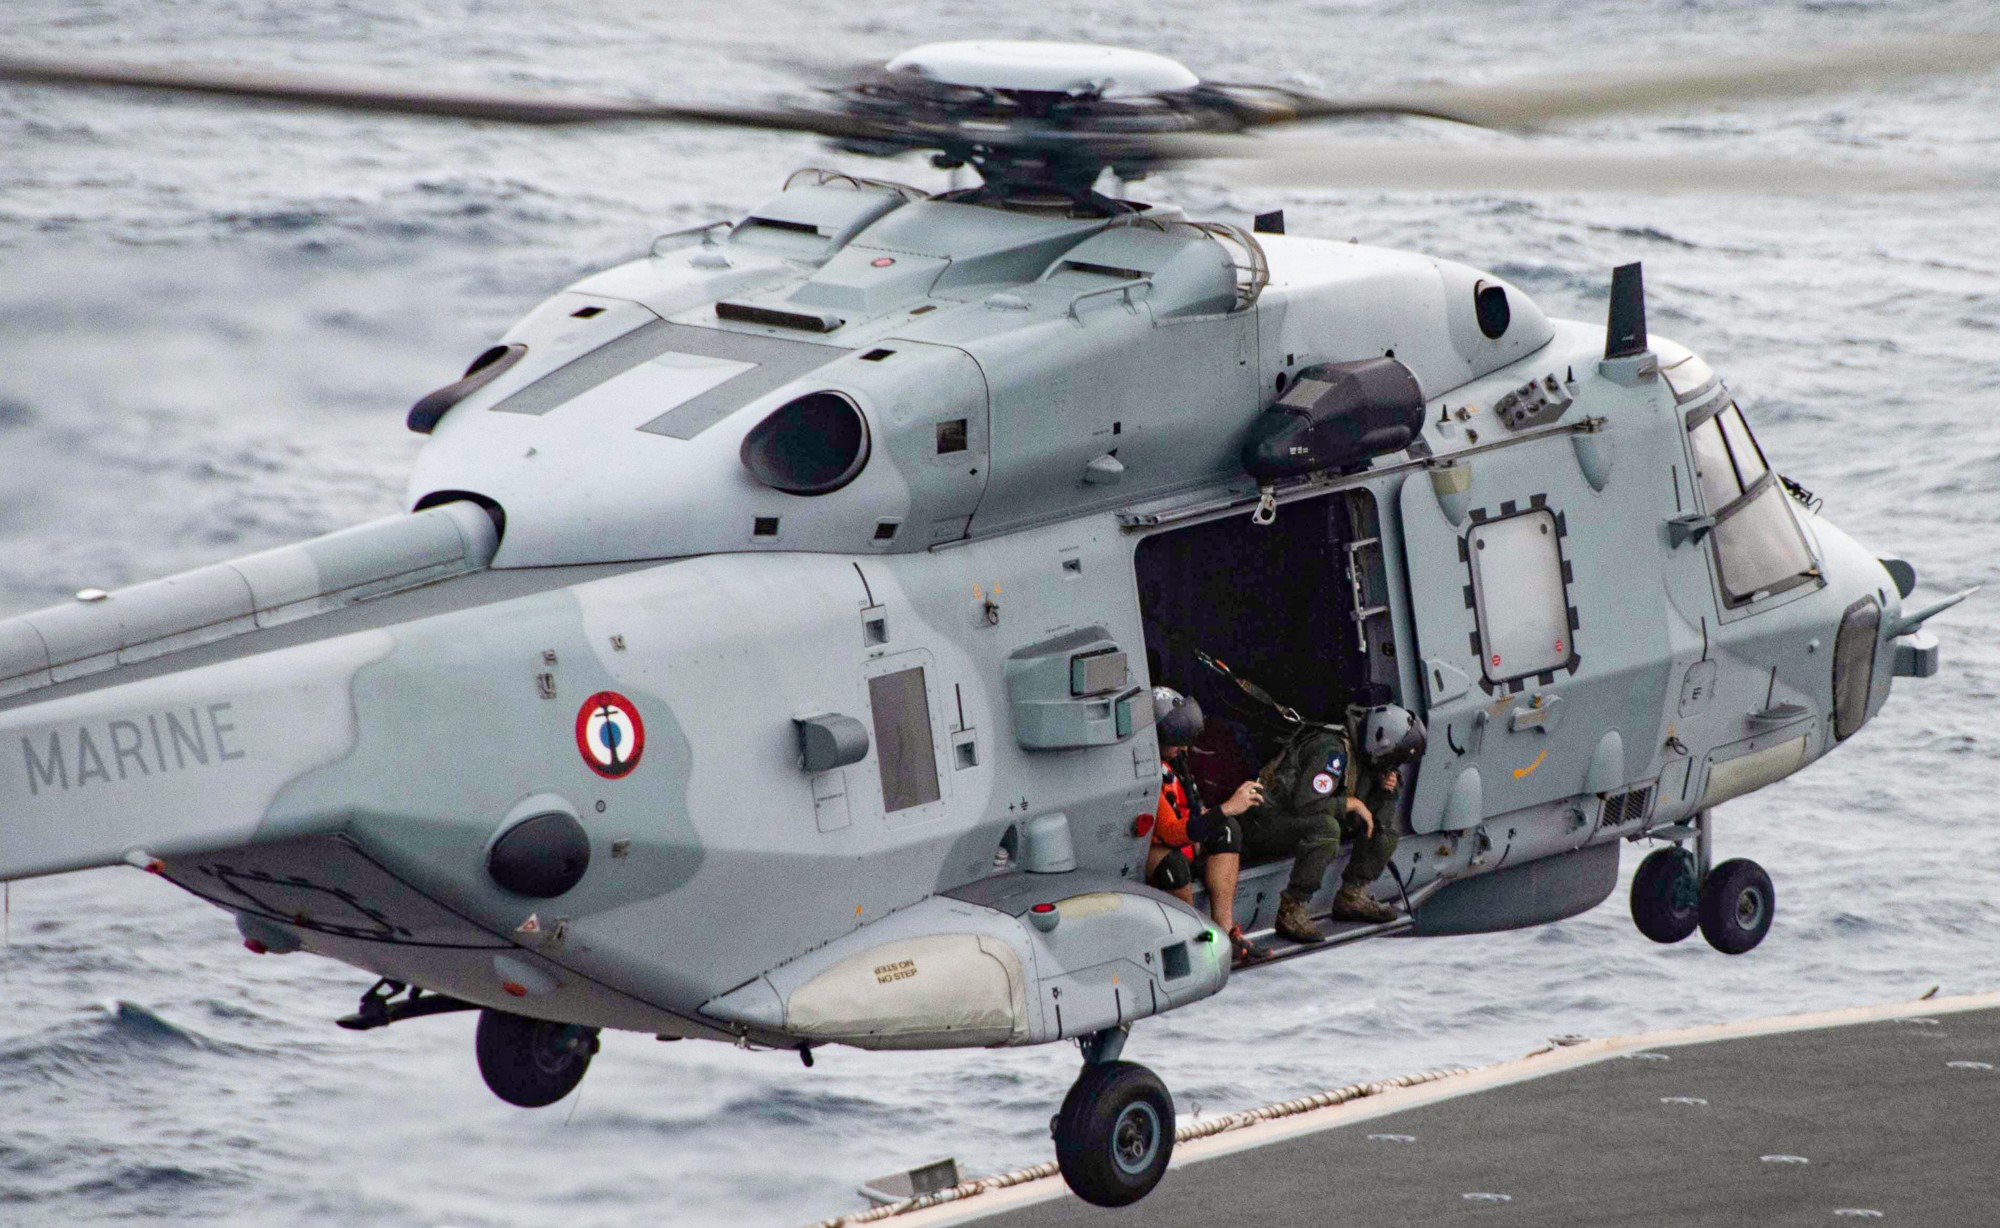 nh90 caiman nfh helicopter french navy marine nationale aeronavale flottille 31f 33f 48